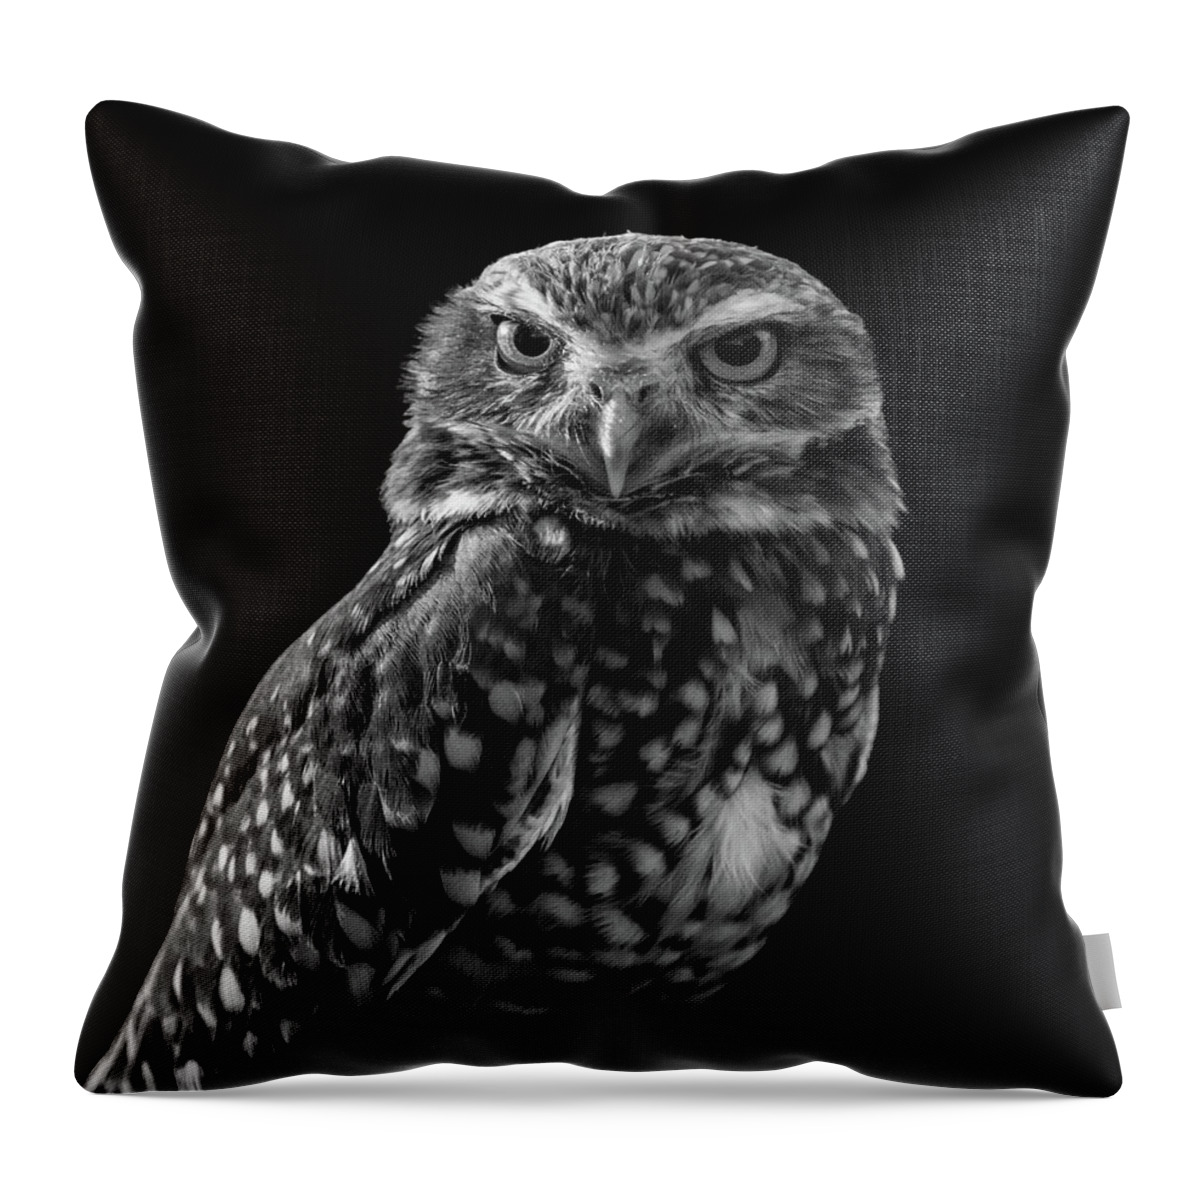 Burrowing Owl Throw Pillow featuring the photograph Burrowing Owl by Chris Scroggins